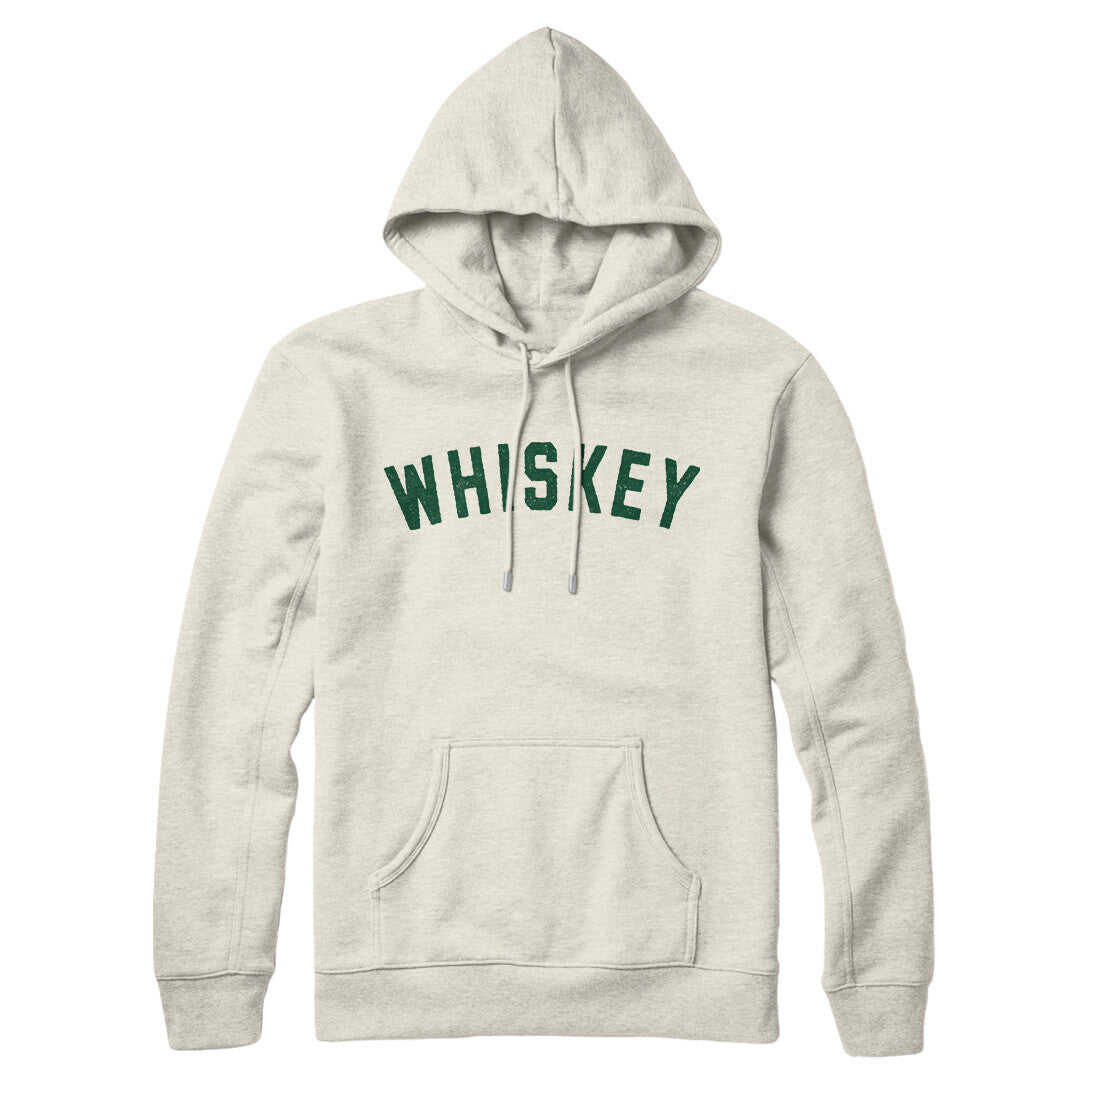 Whiskey in Heather Oatmeal Color